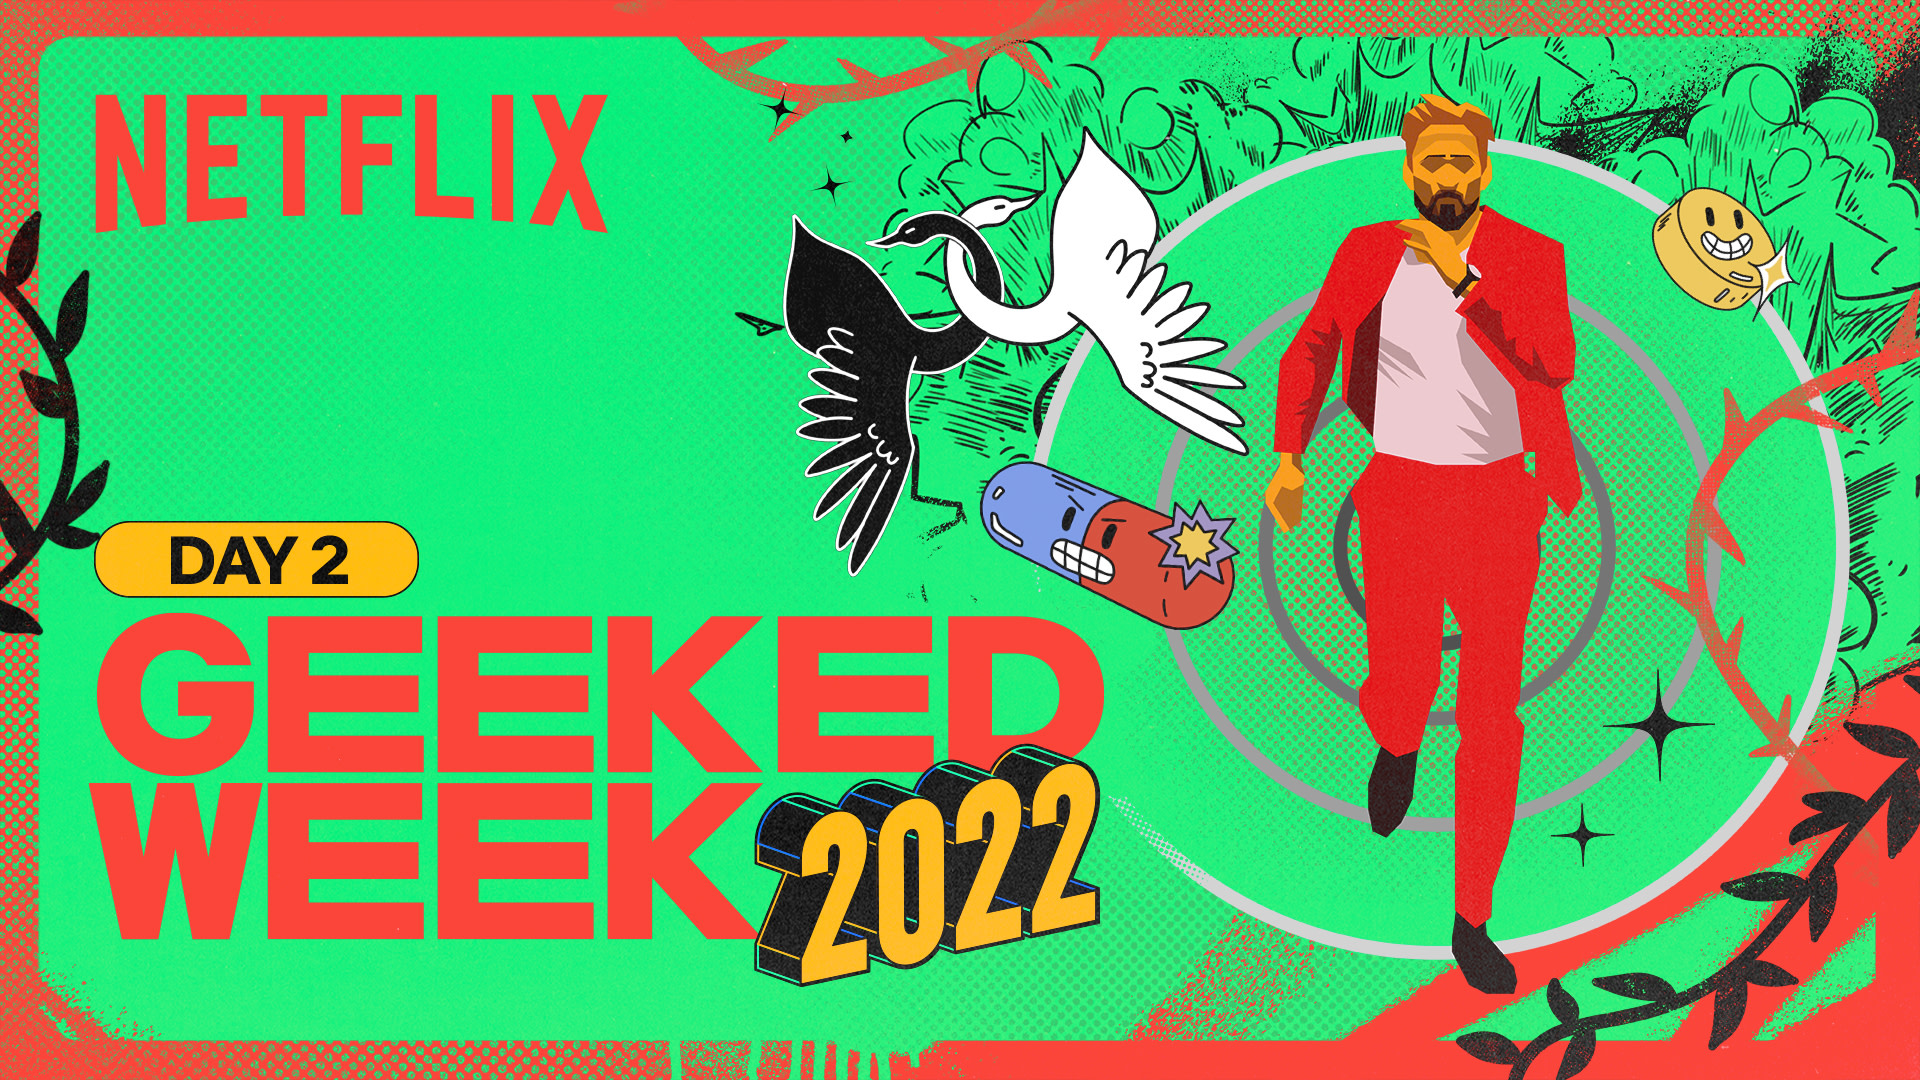 Geeked Week 2022 Recap: All the News and Sneak Peeks From Film Day